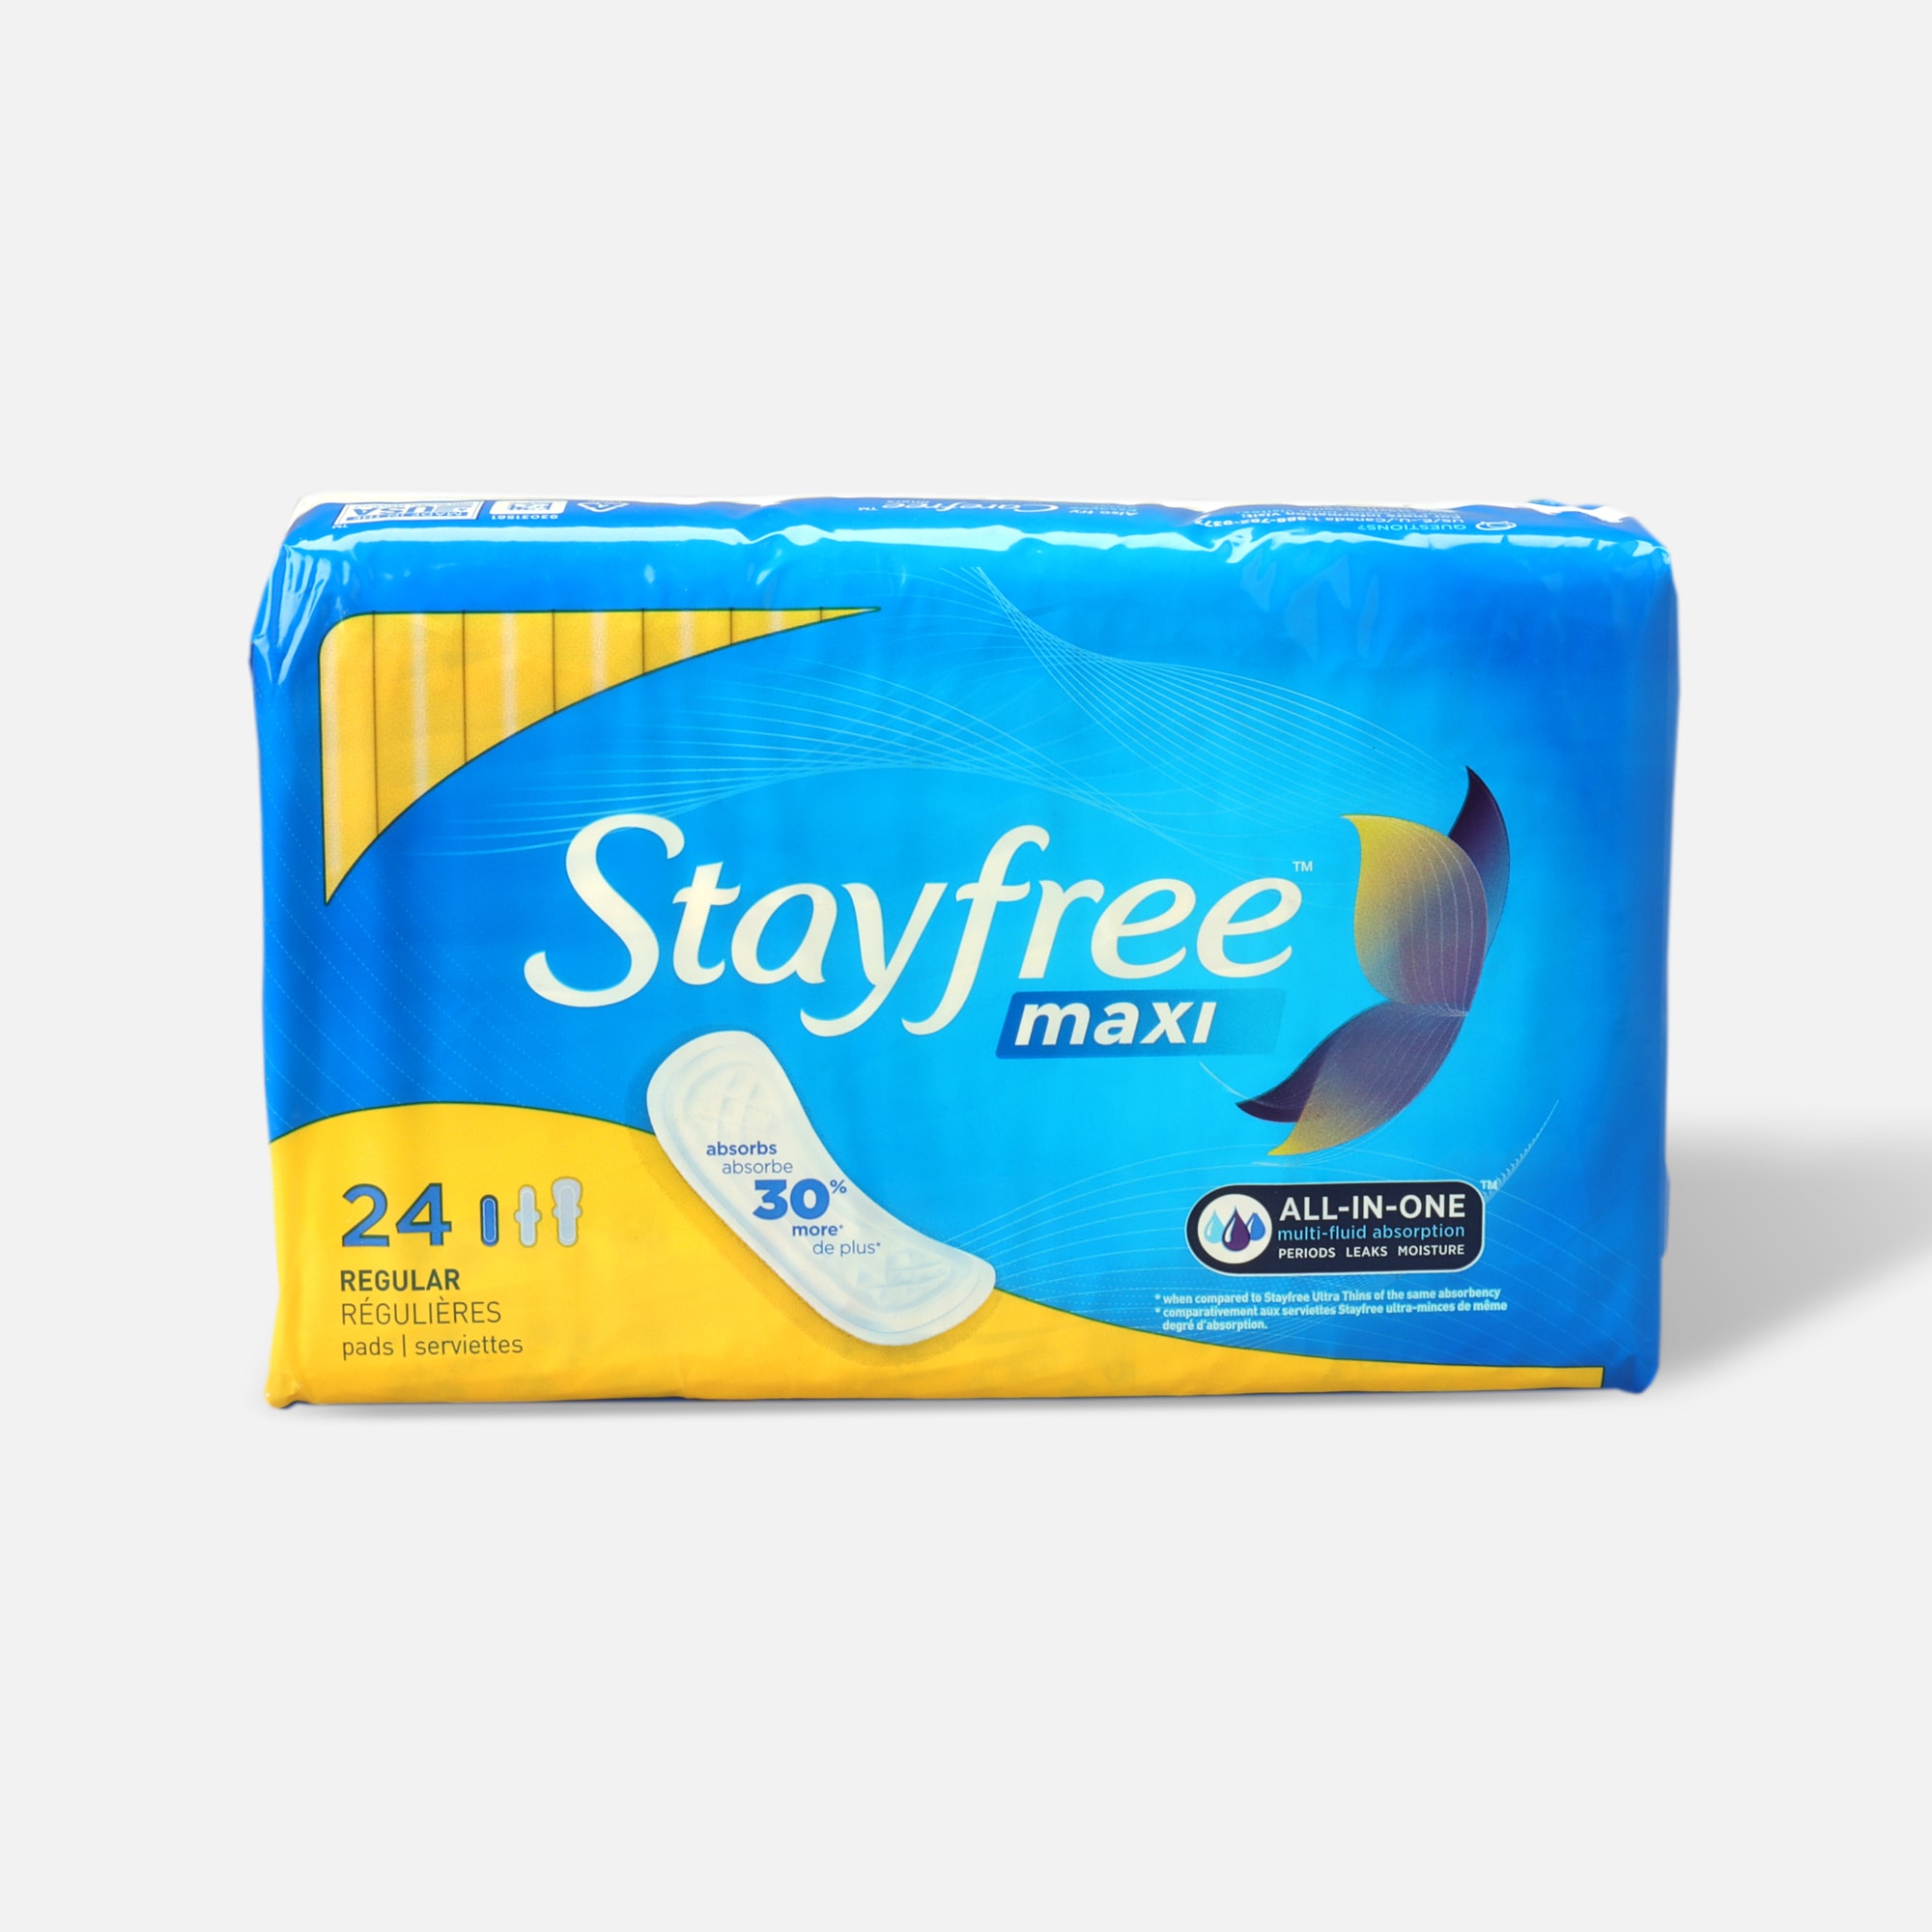 HSA Eligible  Stayfree Maxi Pads Regular, 24ct